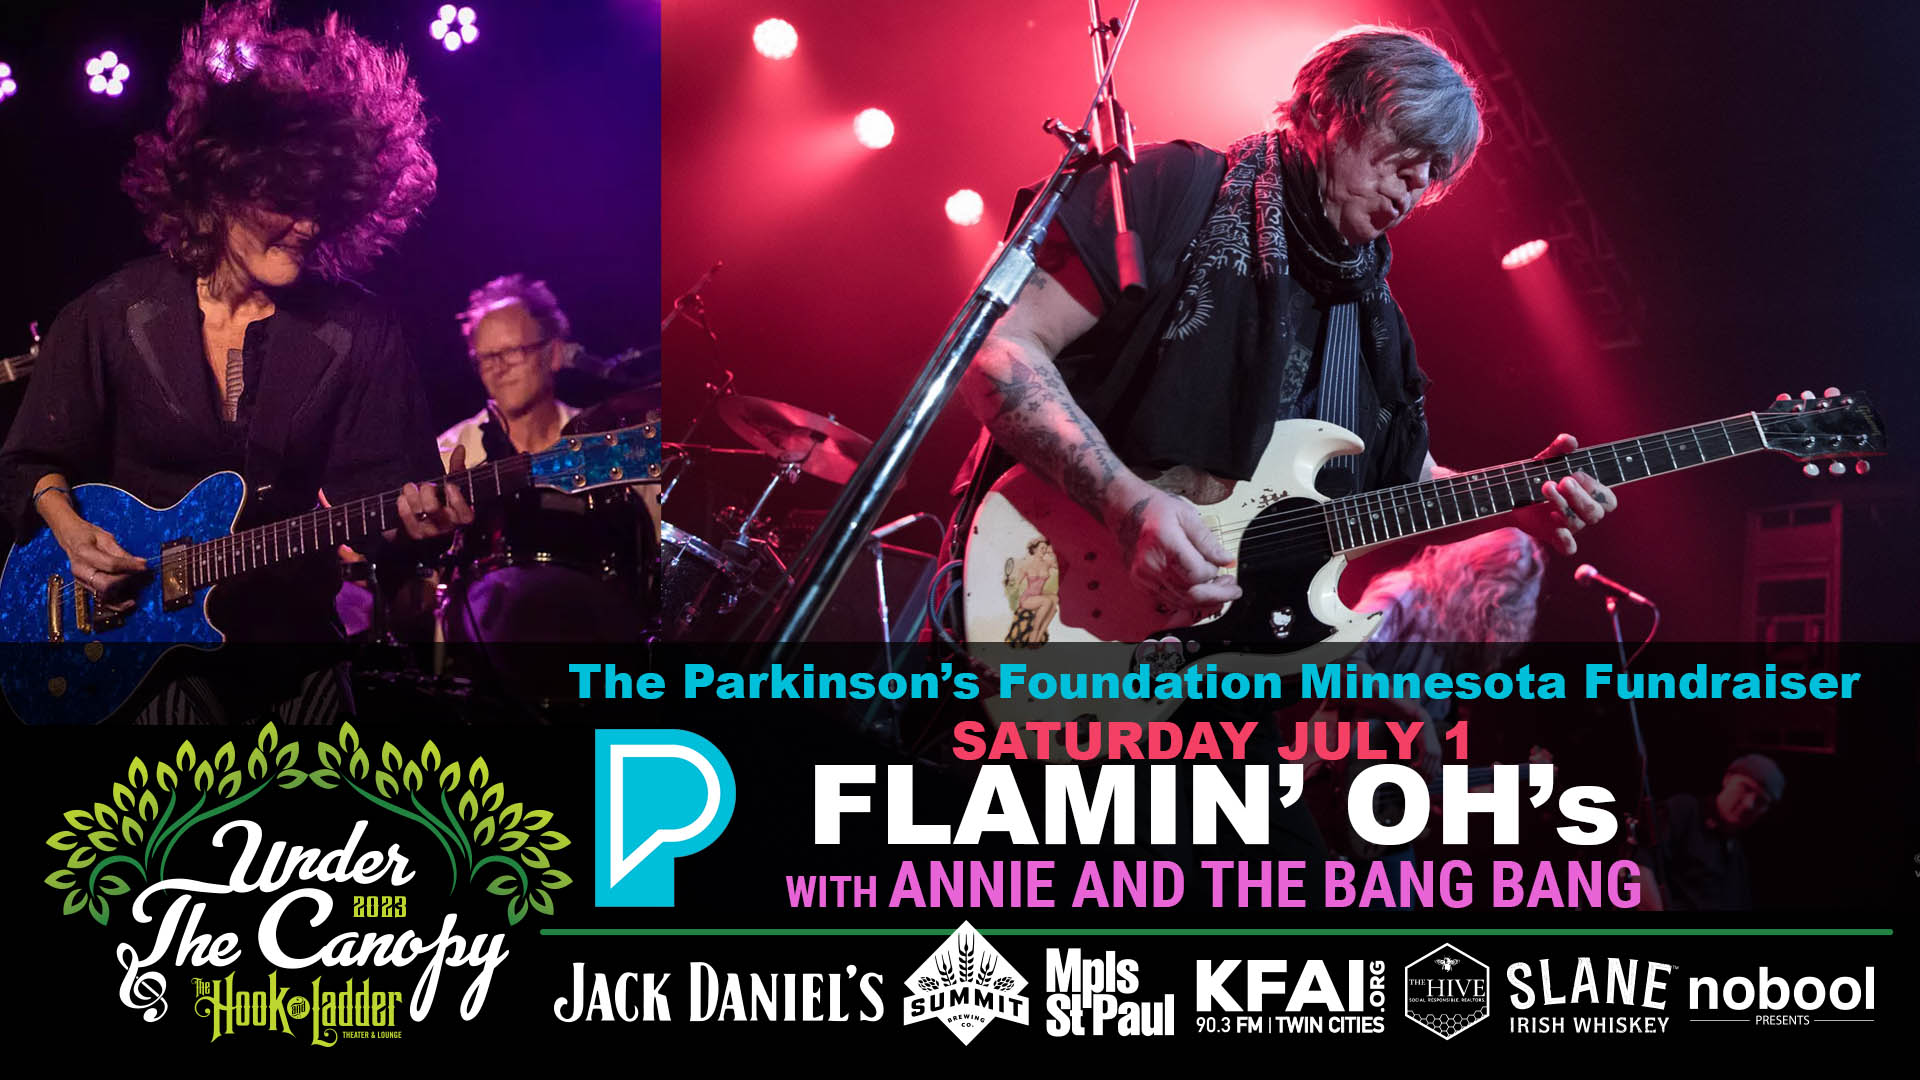 The Flamin’ Oh’s with Annie And The Bang Bang The Parkinson’s Foundation Minnesota Fundraiser Saturday, July 1 Under The Canopy at The Hook and Ladder Theater "An Urban Outdoor Summer Concert Series" Doors 6:00pm :: Music 7:00pm :: 21+ GA: $30 ADV / $40 DOS